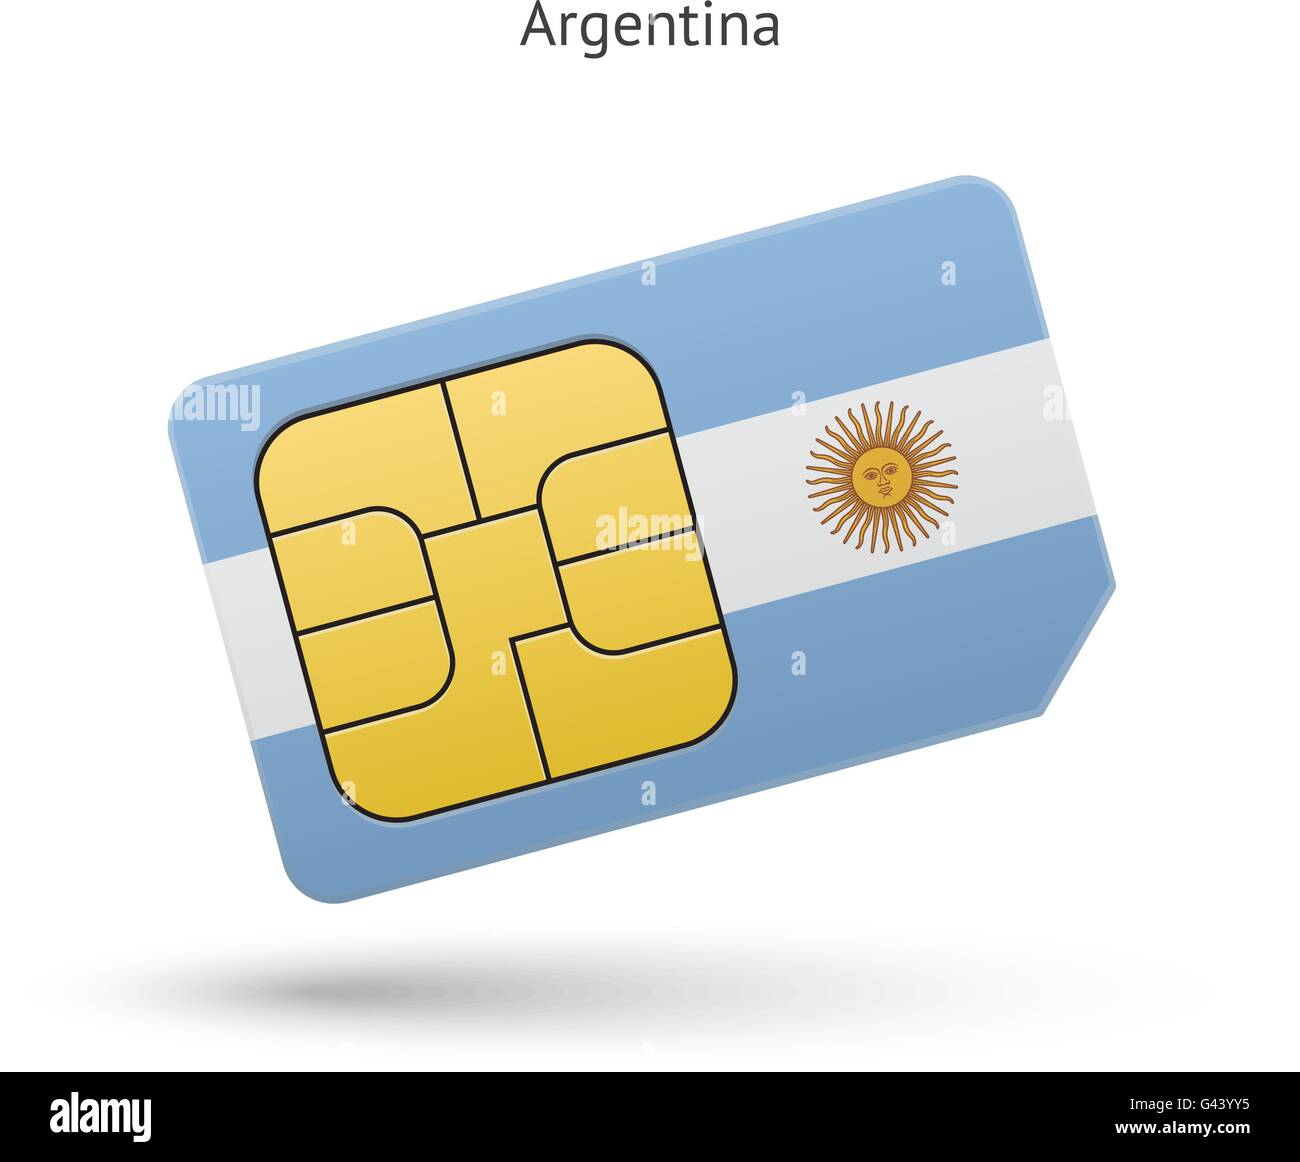 Argentina mobile phone sim card with flag. Stock Vector